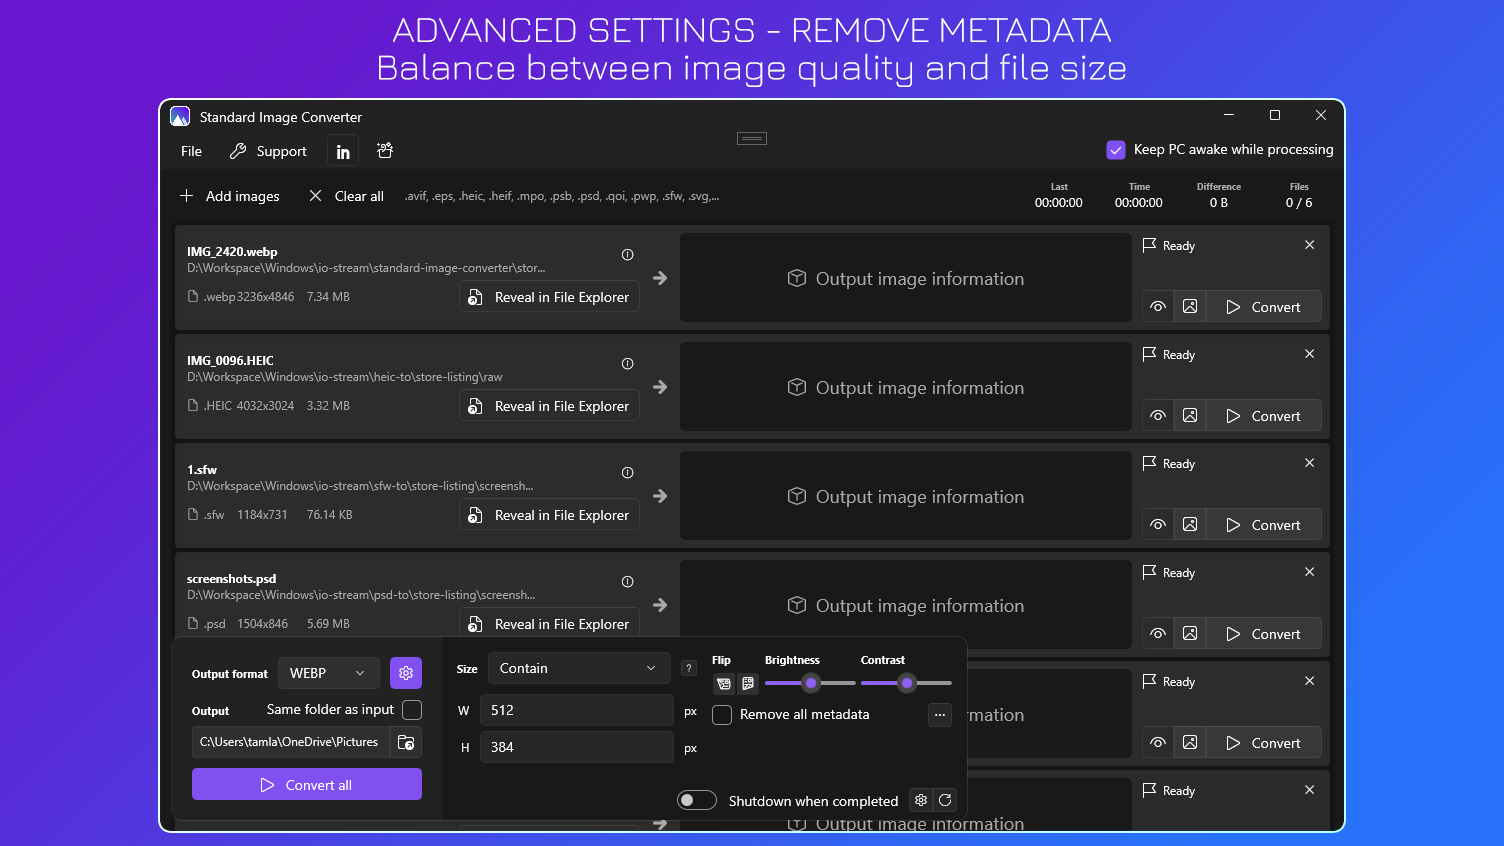 Advanced Settings - Remove Metadata - Balance between image quality and file size.